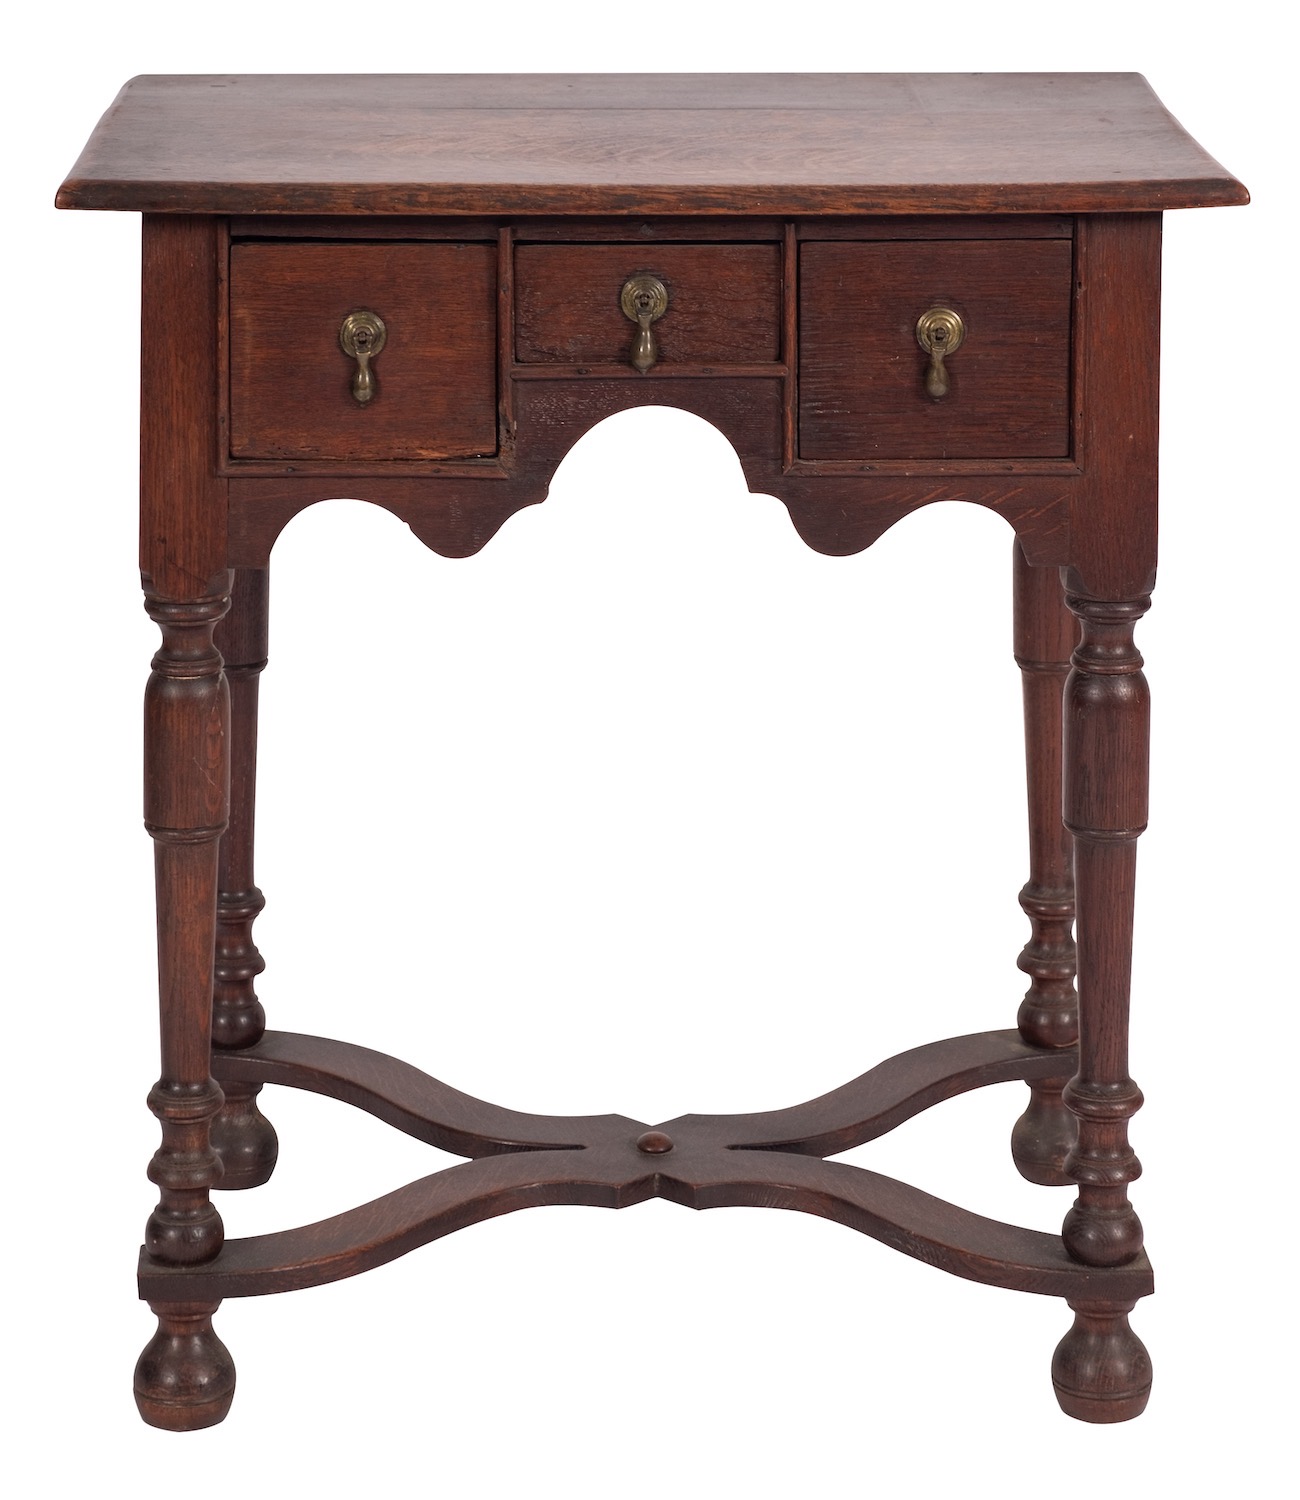 A Queen Anne or George I oak lowboy side table,